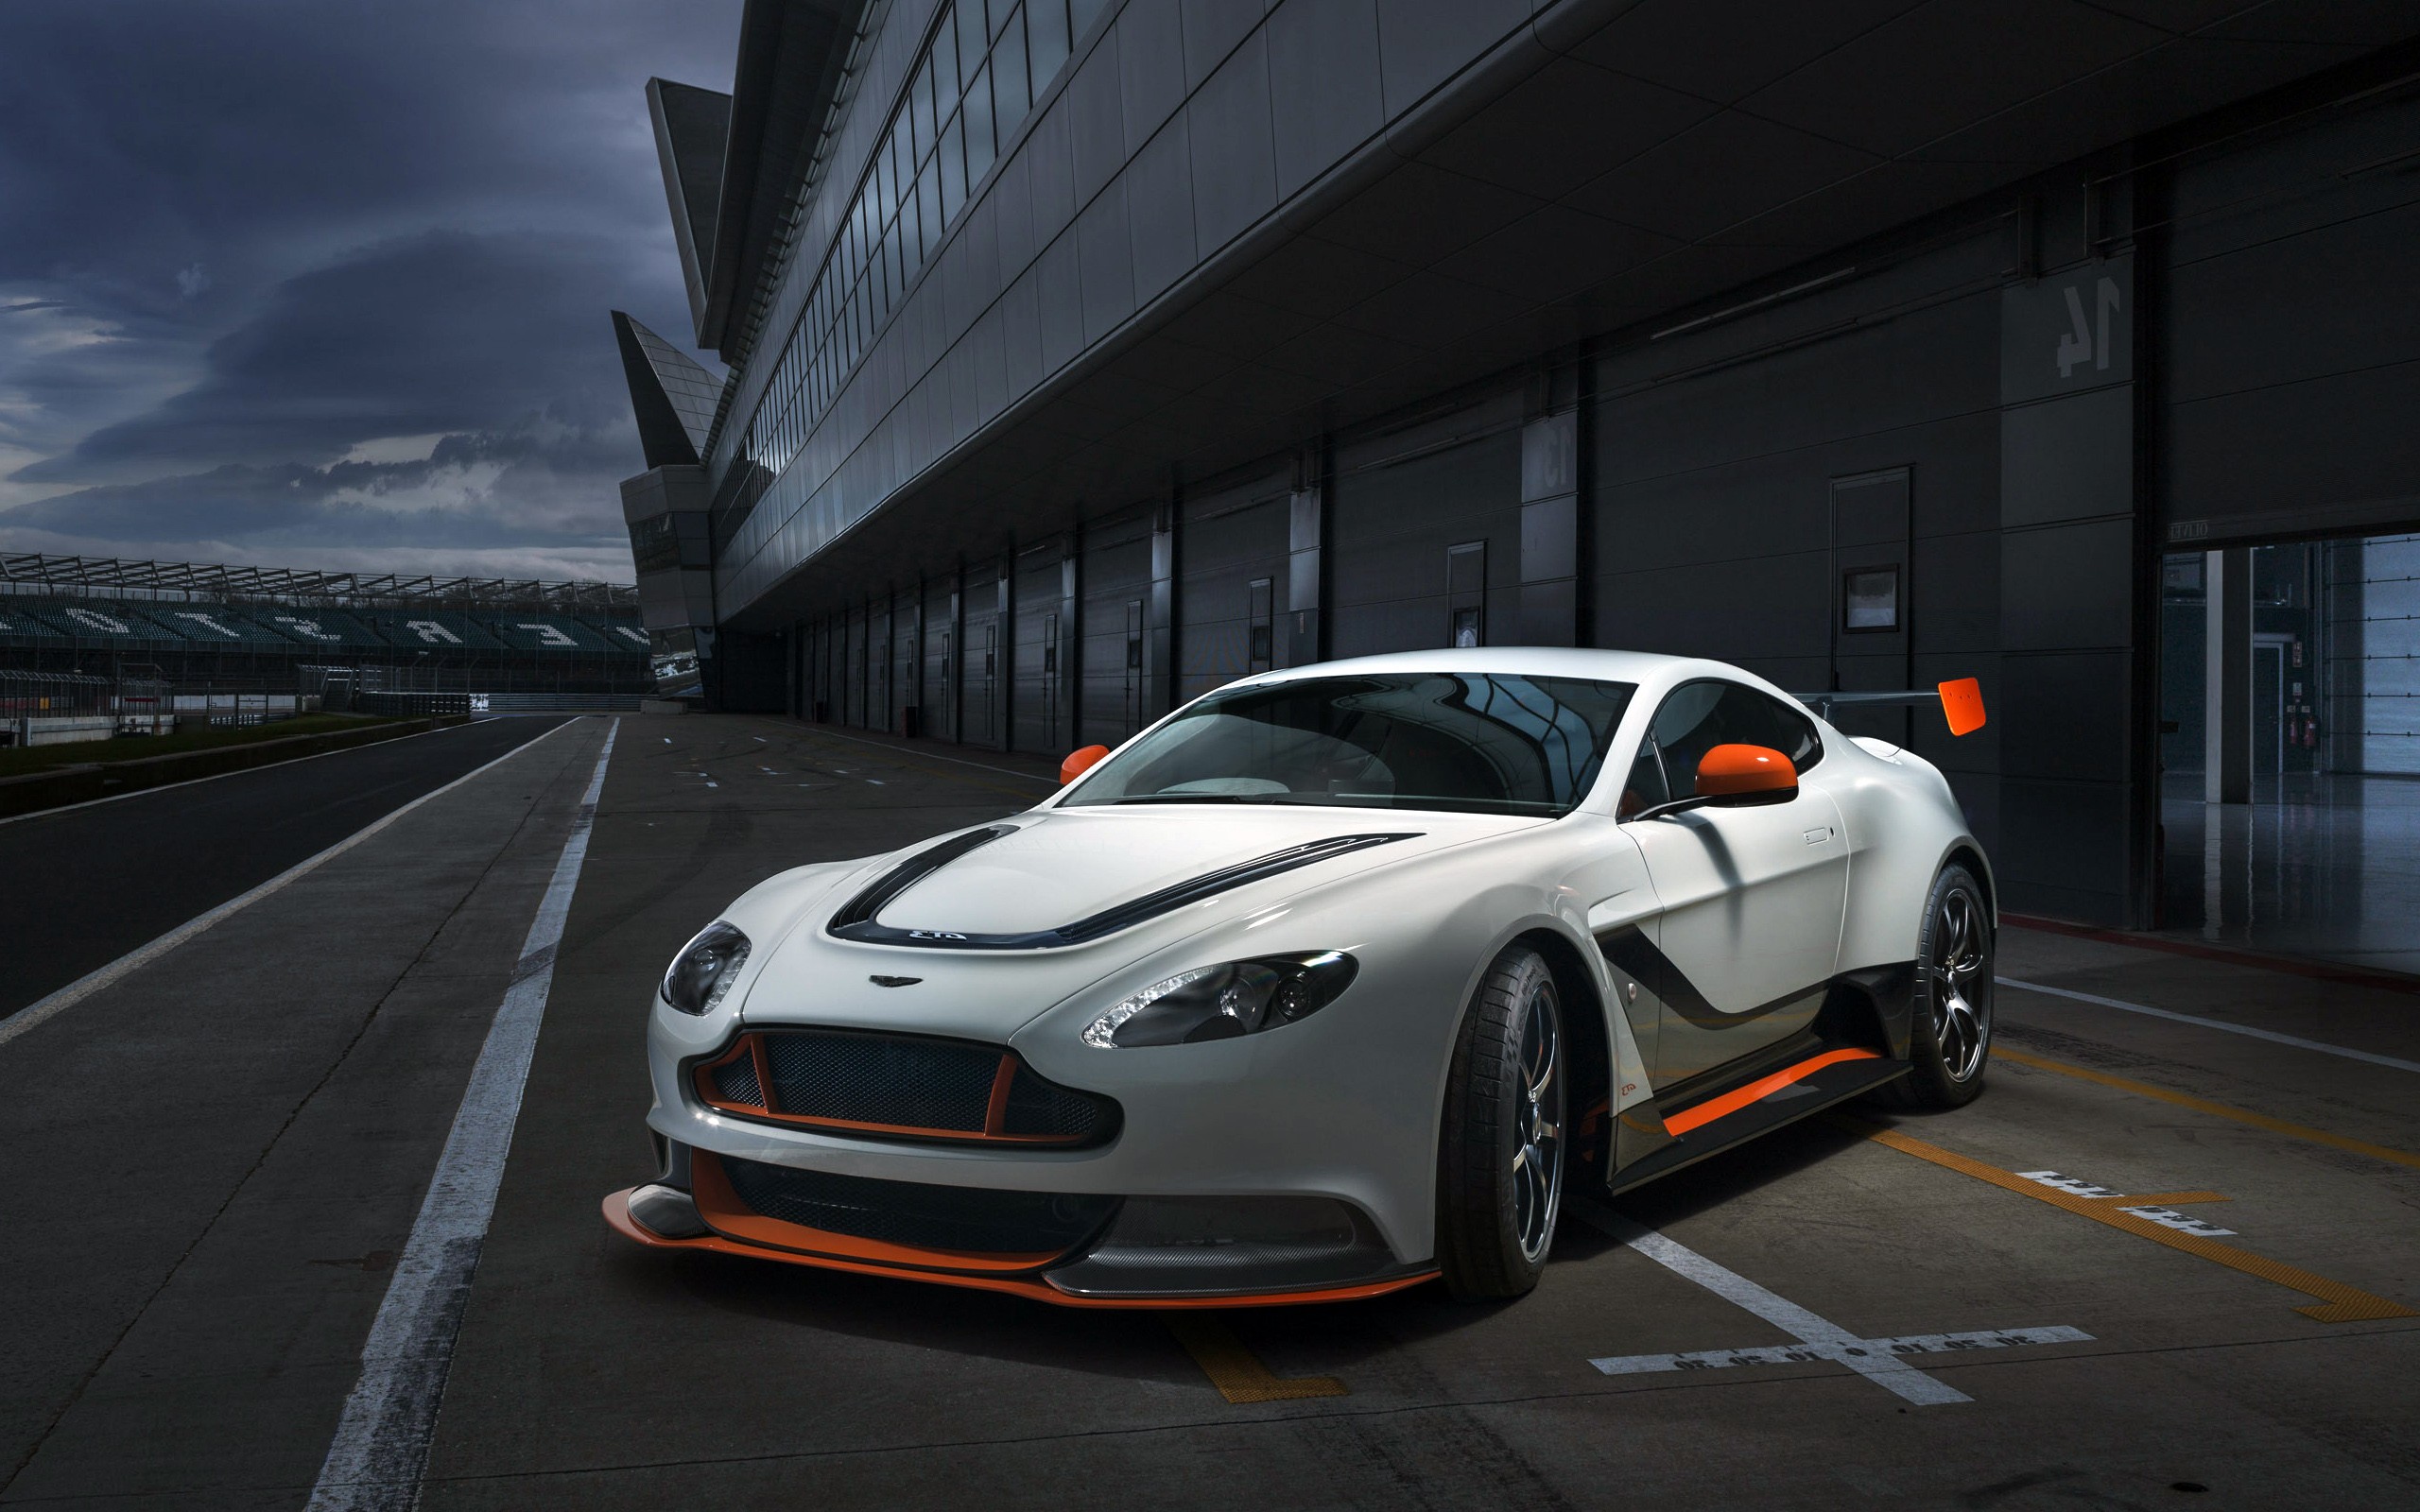 Wallpapers Aston Martin view from front cars on the desktop